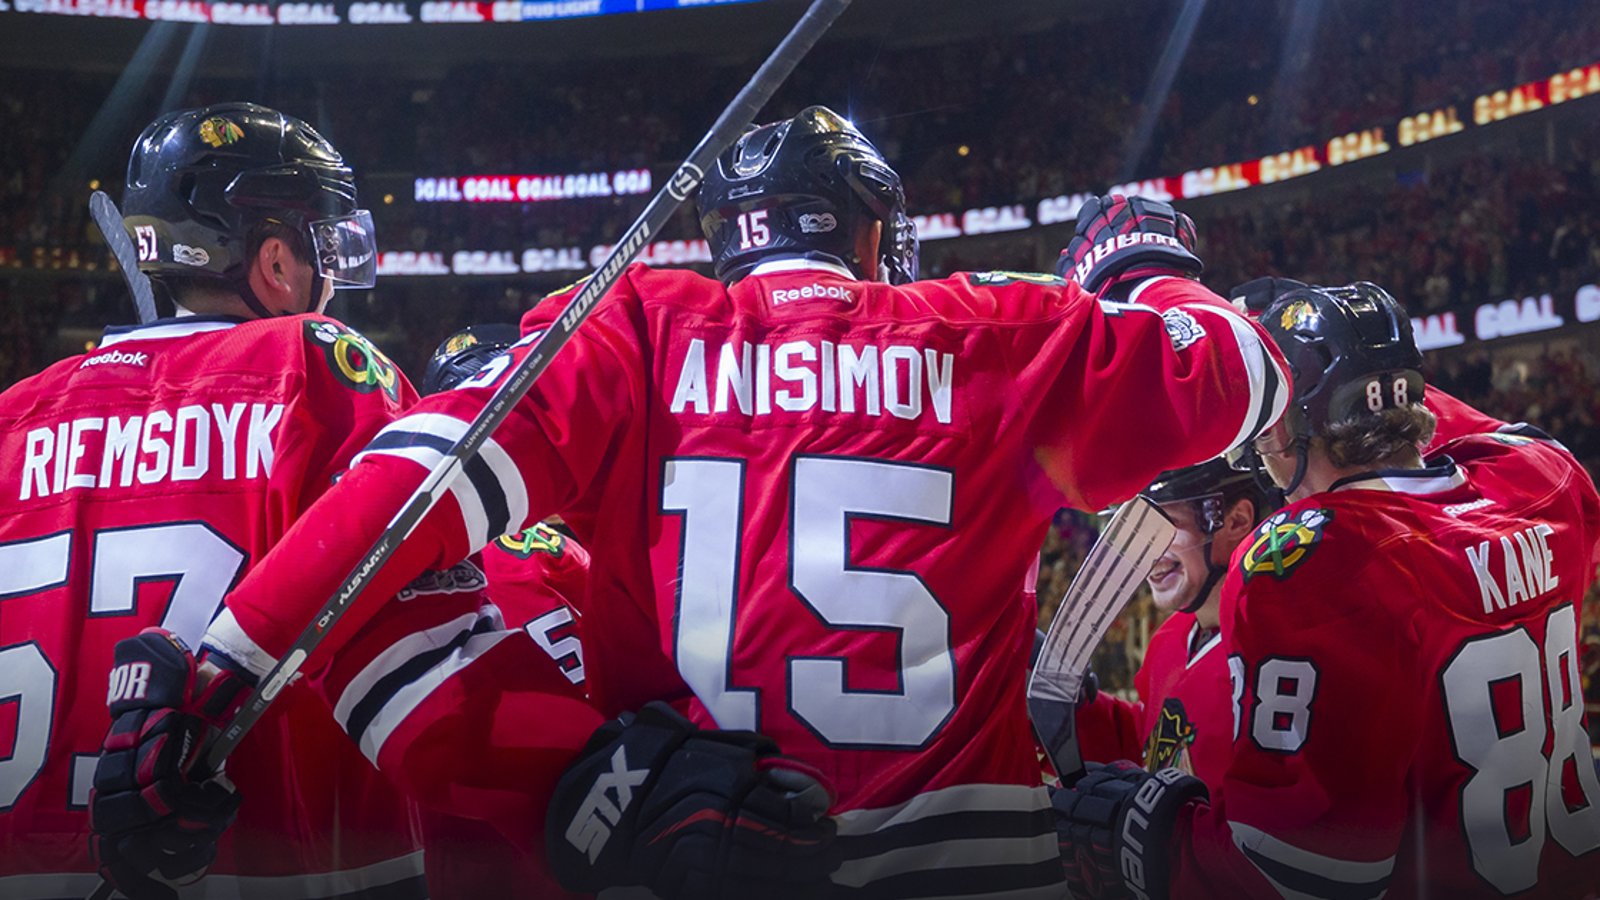 Former Blackhawks to have his number retired